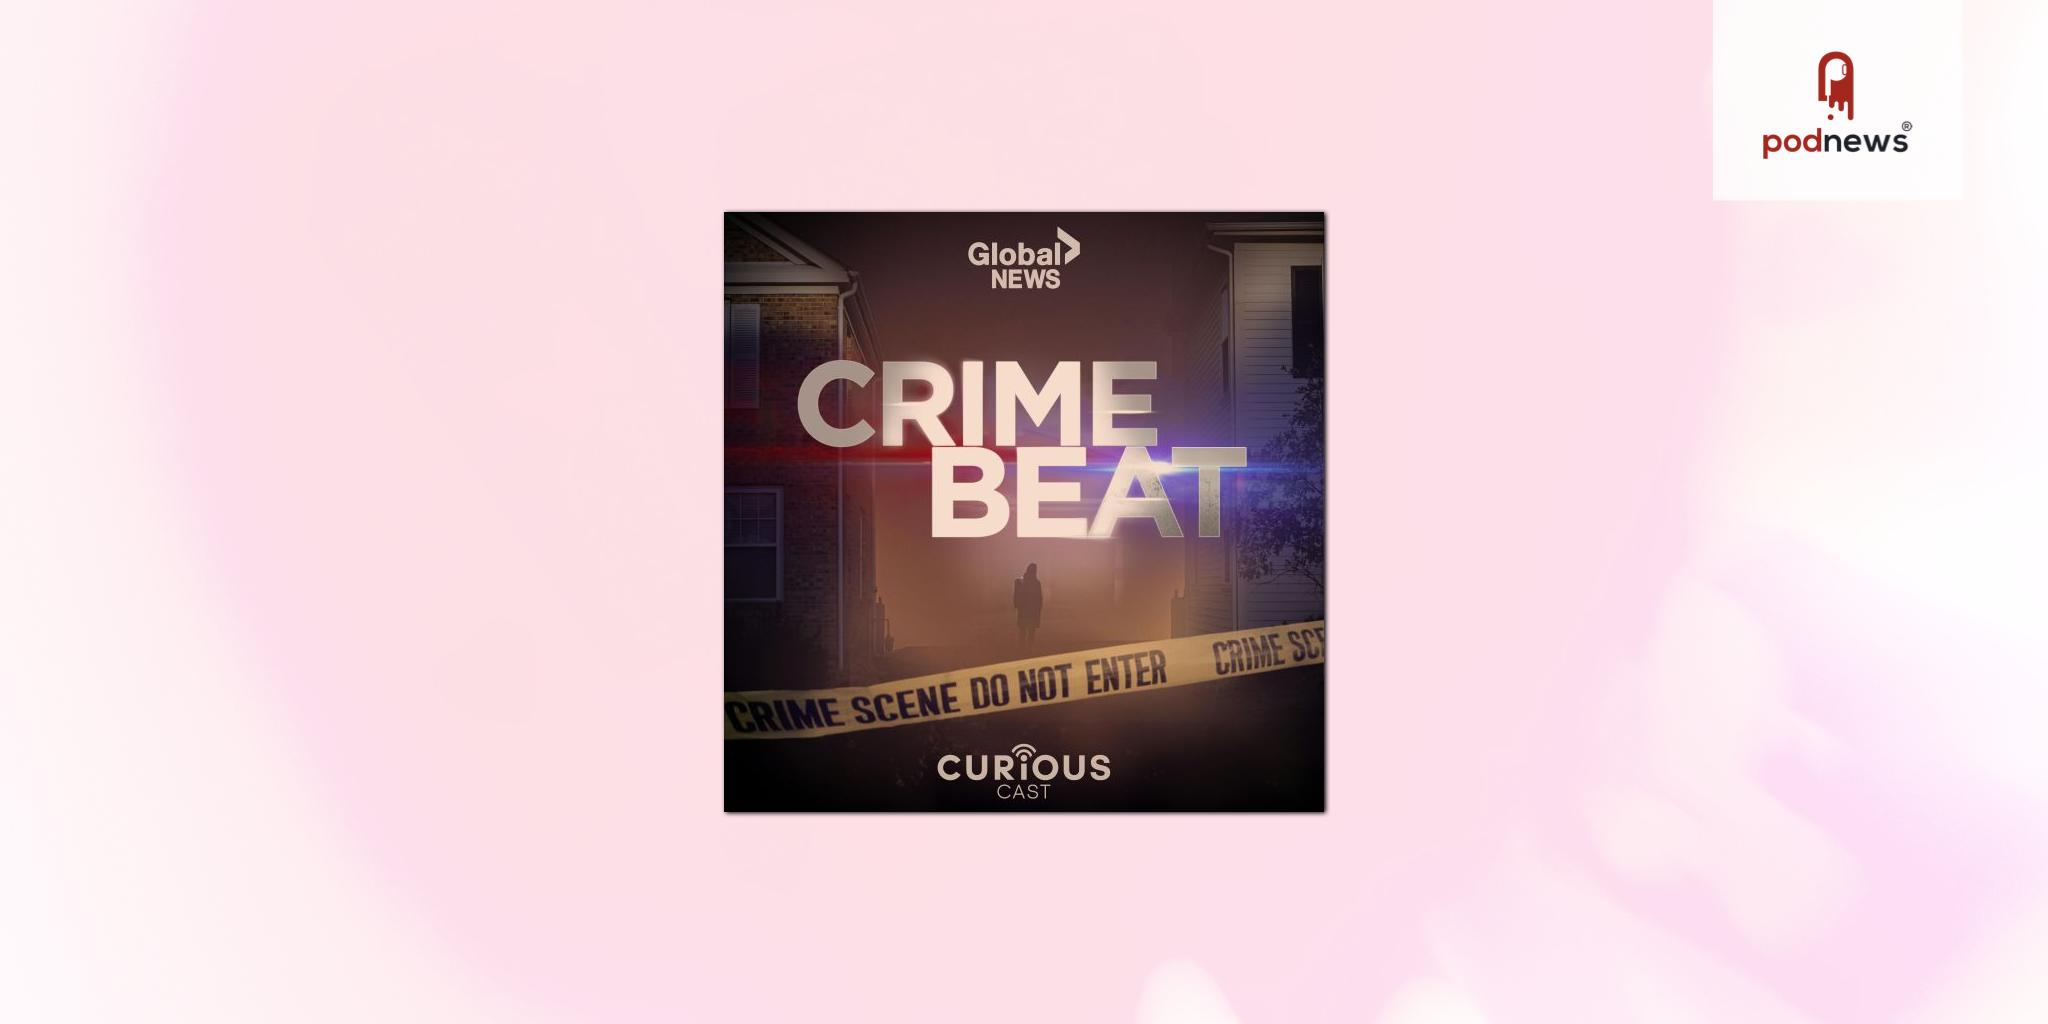 Award-winning Curiouscast original podcast Crime Beat launches season four today